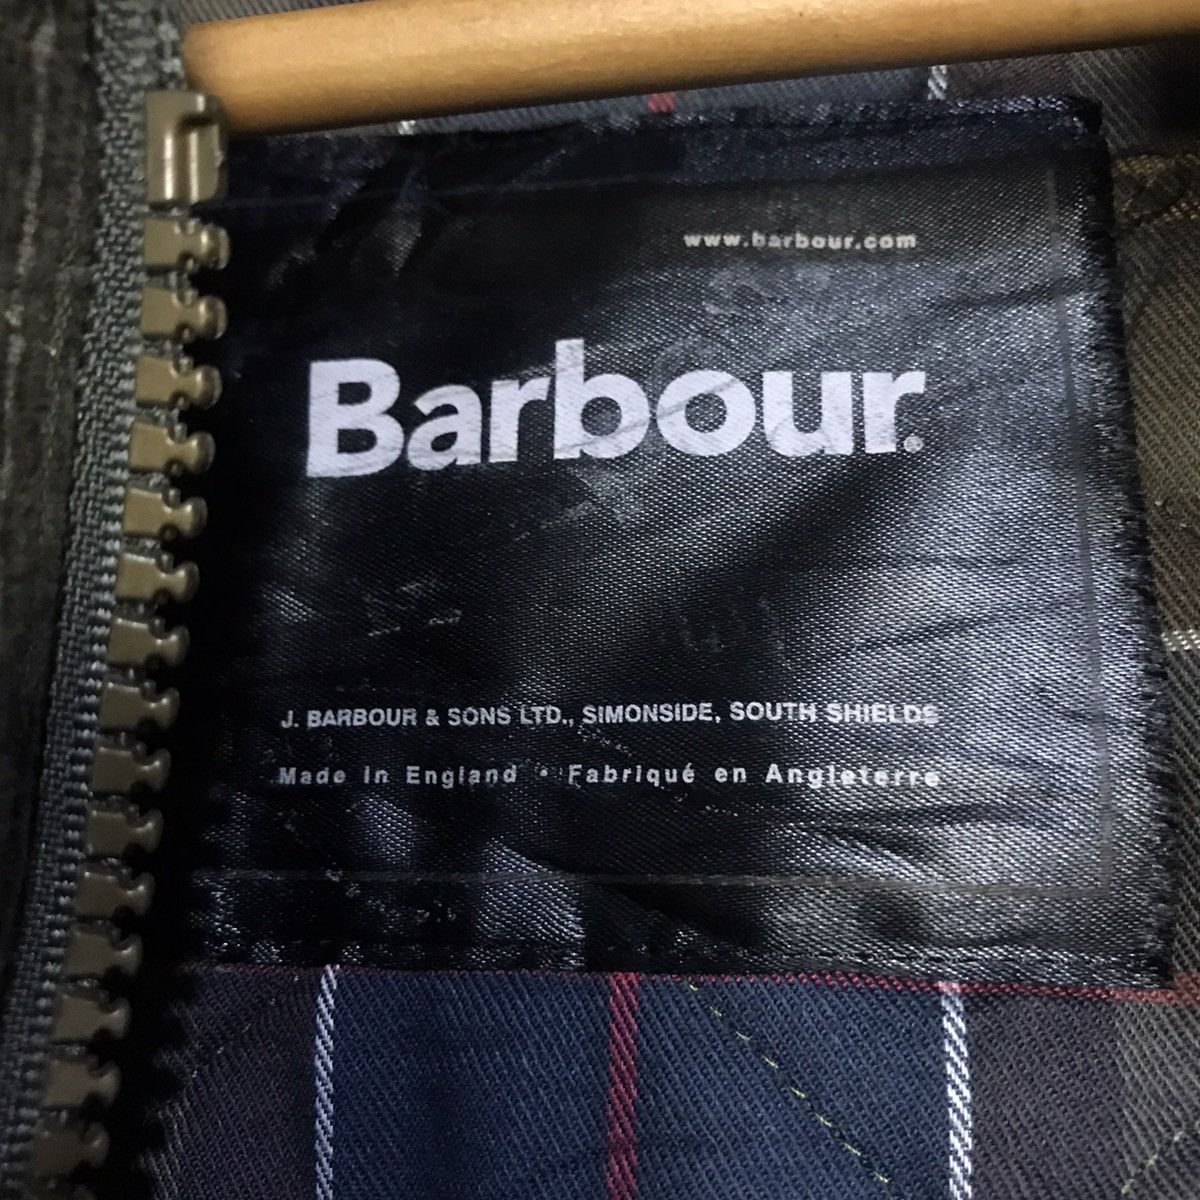 Barbour fine corduroy quilted jacket - 5